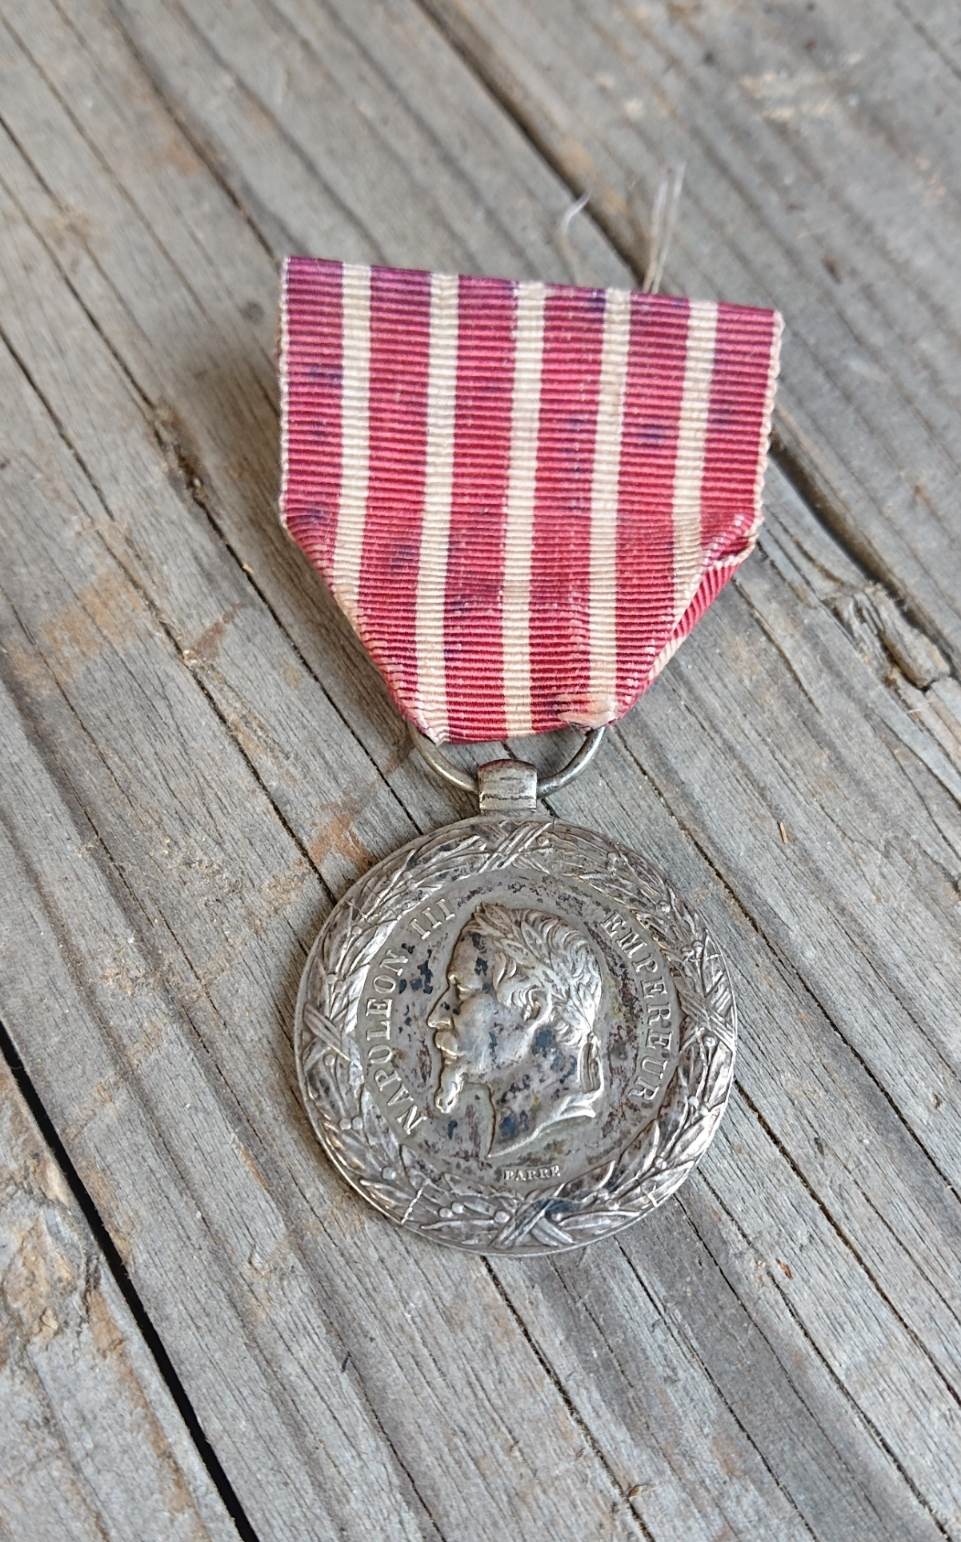 HdS Militaria Médaille campagne d'Italie 1859 / 1859 Italian campaign medal